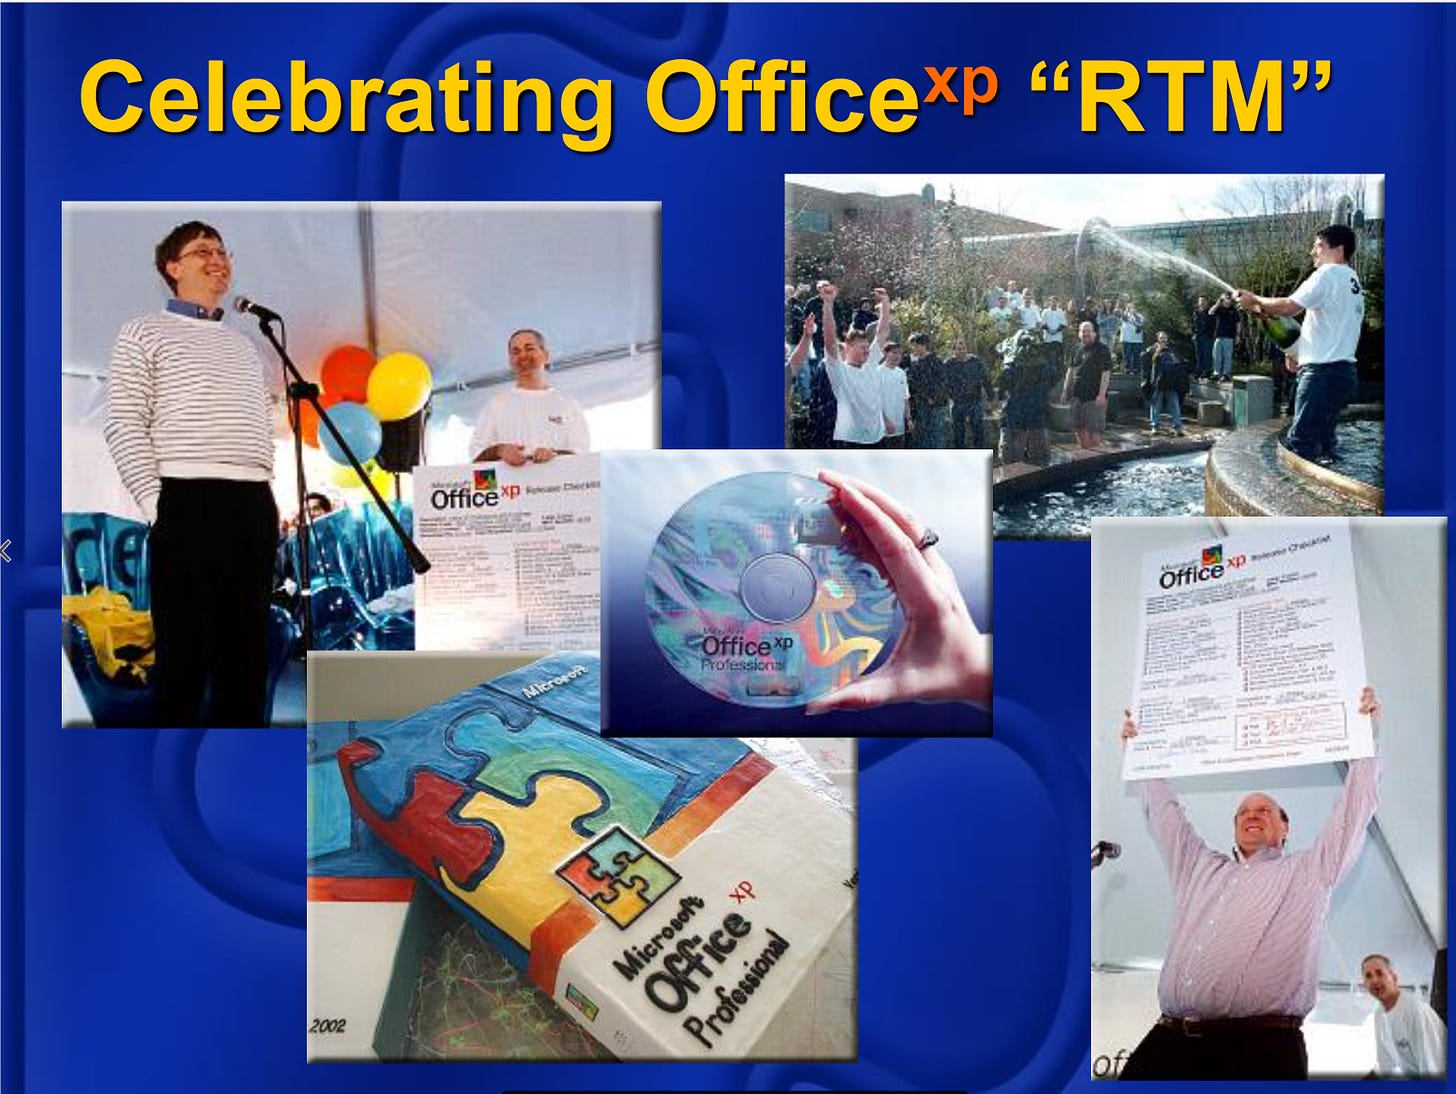 Collage of photos from the Office XP release party including BillG speaking, people dunked in the fountain, a golden master CD, a cake decorated like the box, and Steve Ballmer.